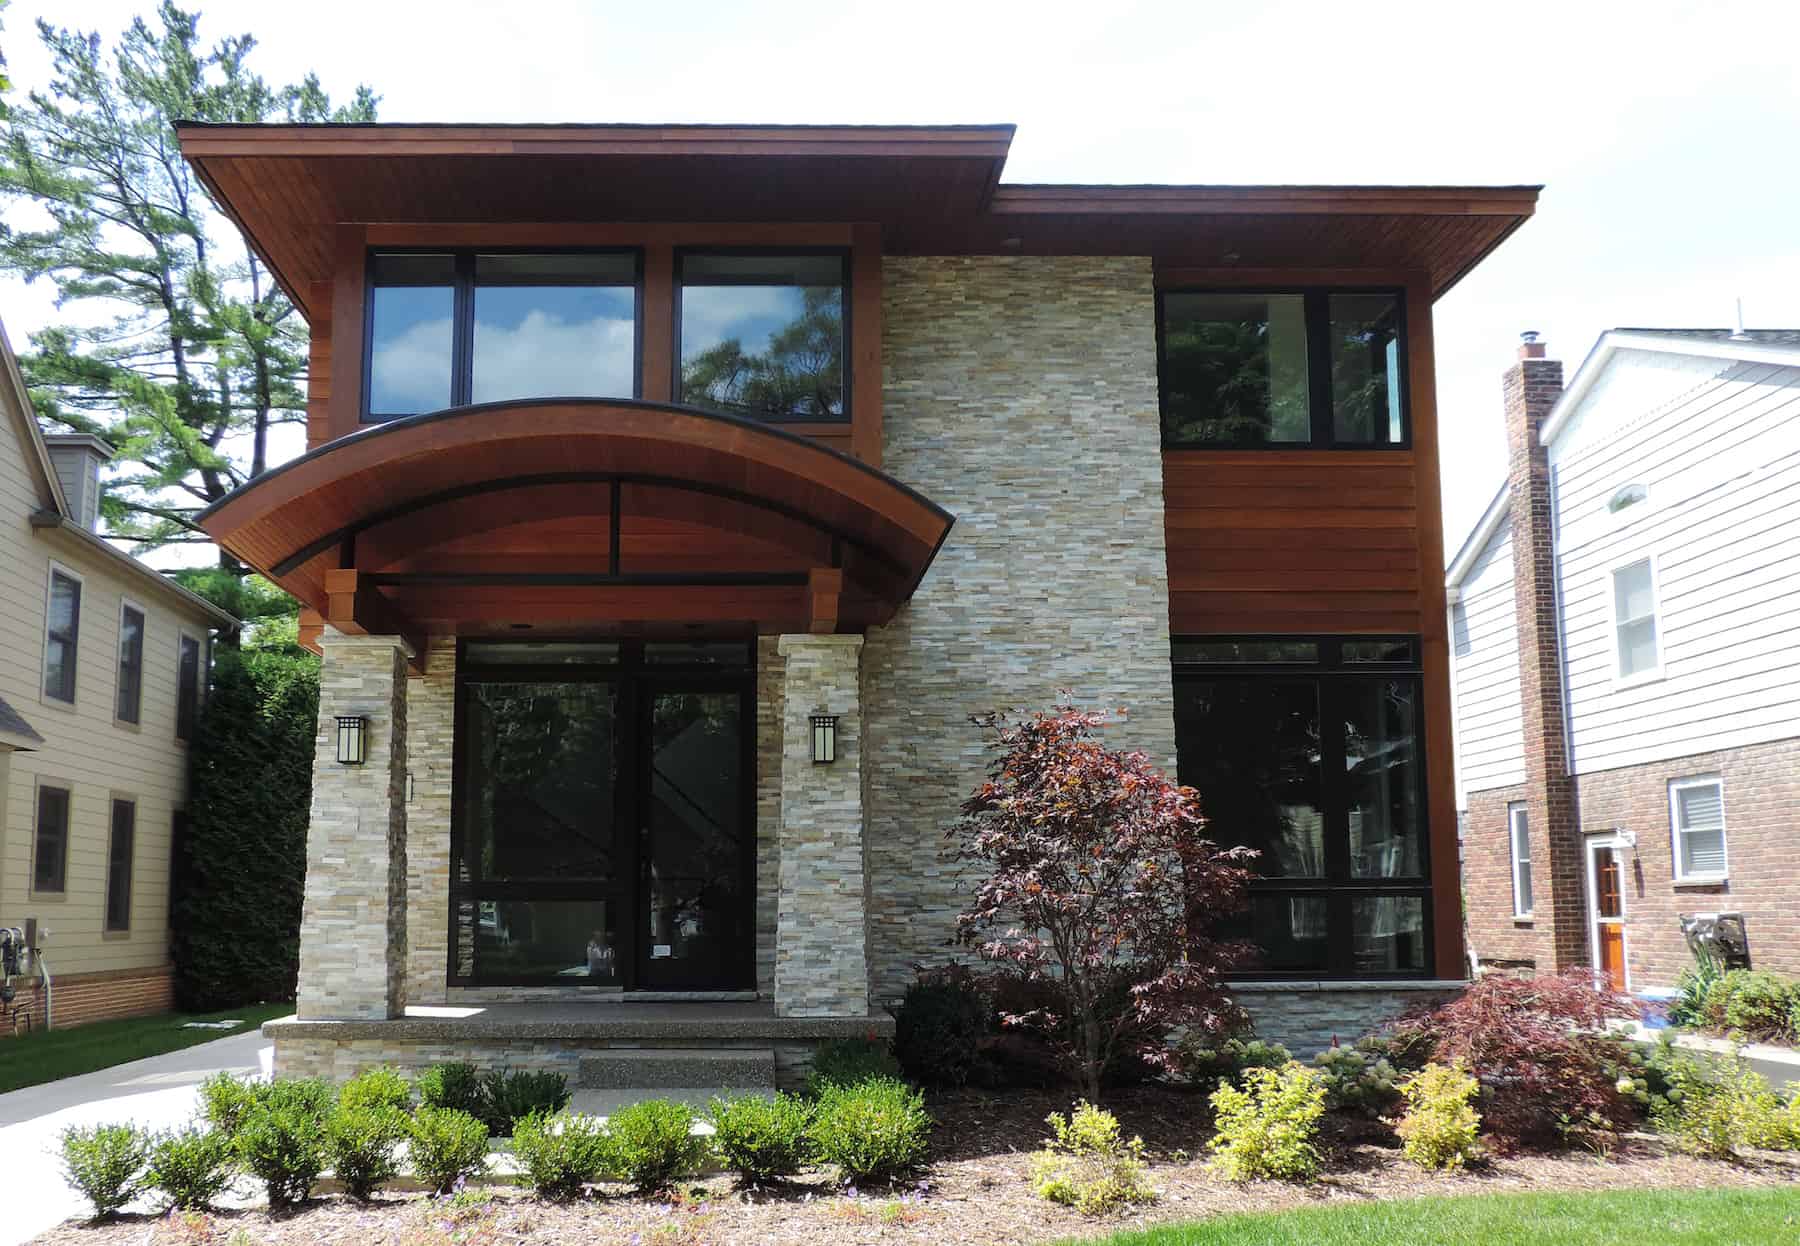 Natural stone veneer and wood home exterior in a modern style with arched details